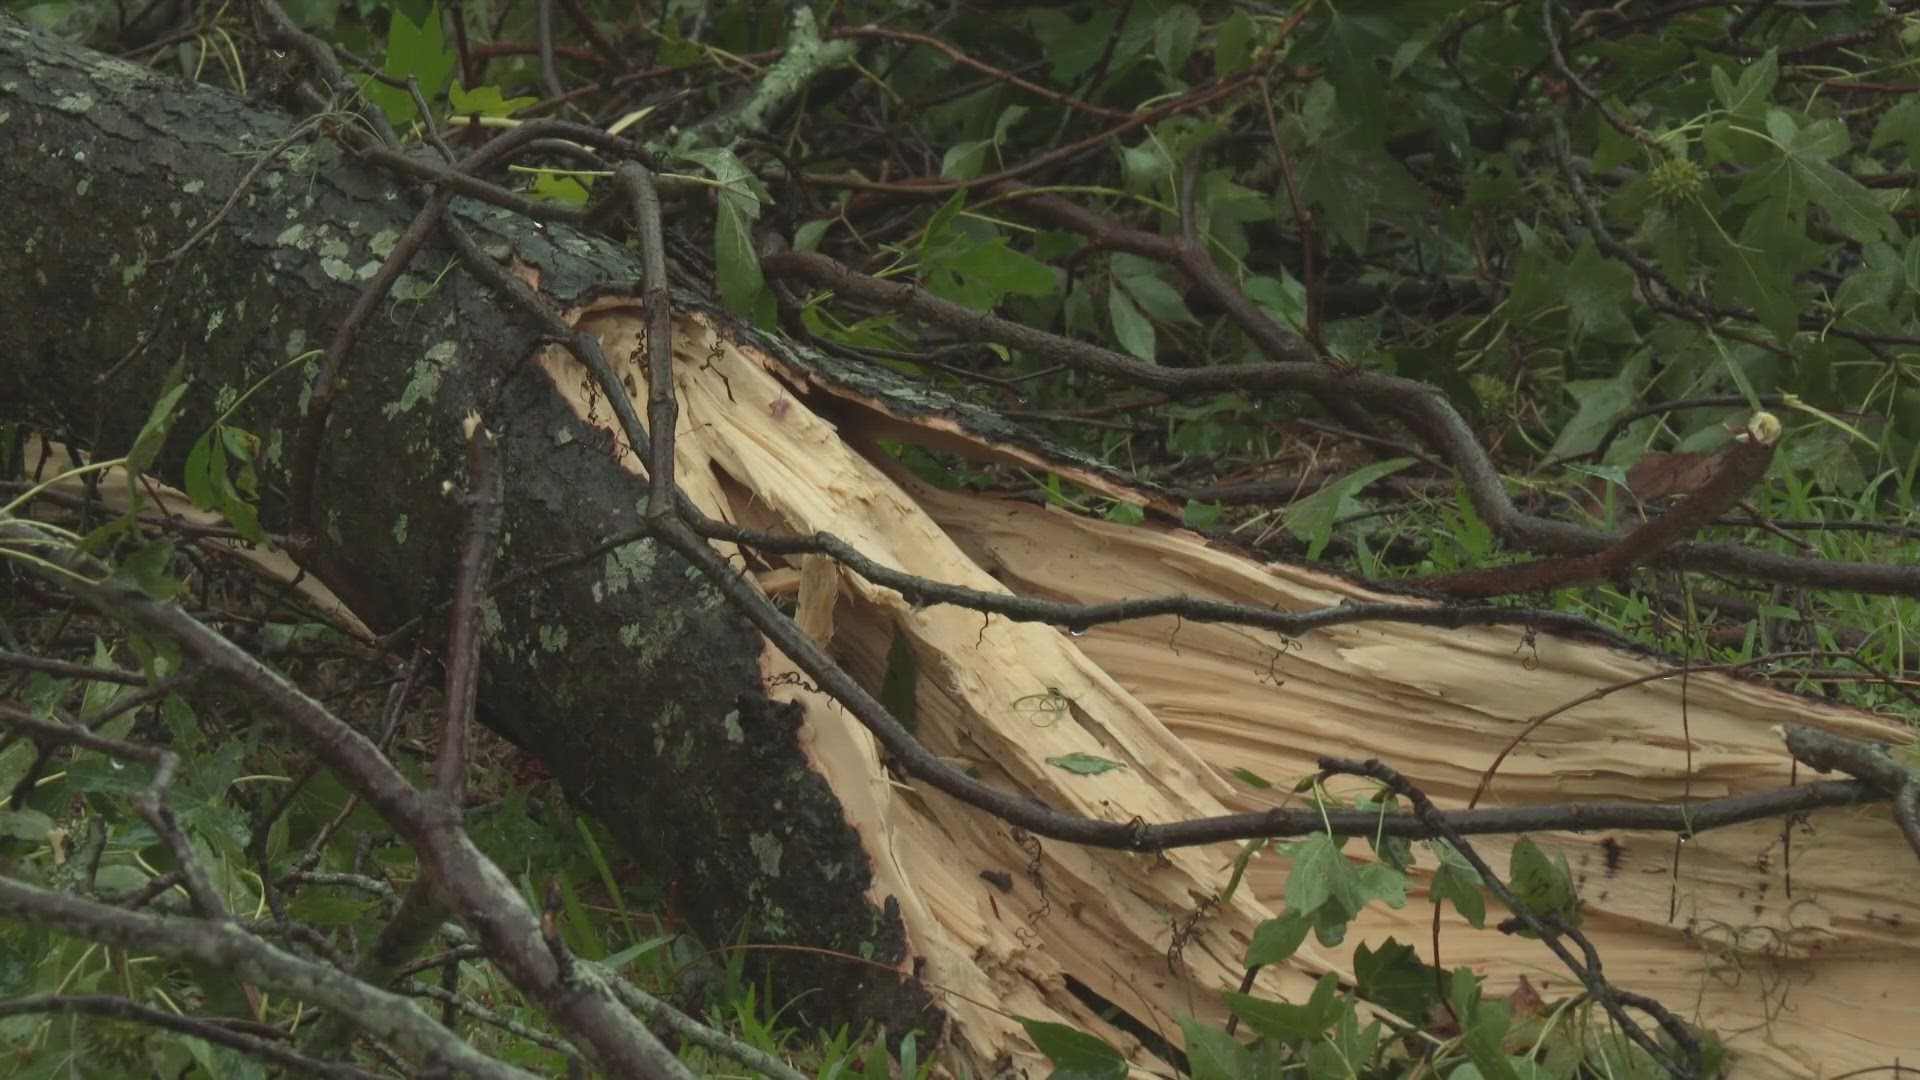 The storm snapped trees in half, and knocked out power for San Jose residents Monday afternoon.